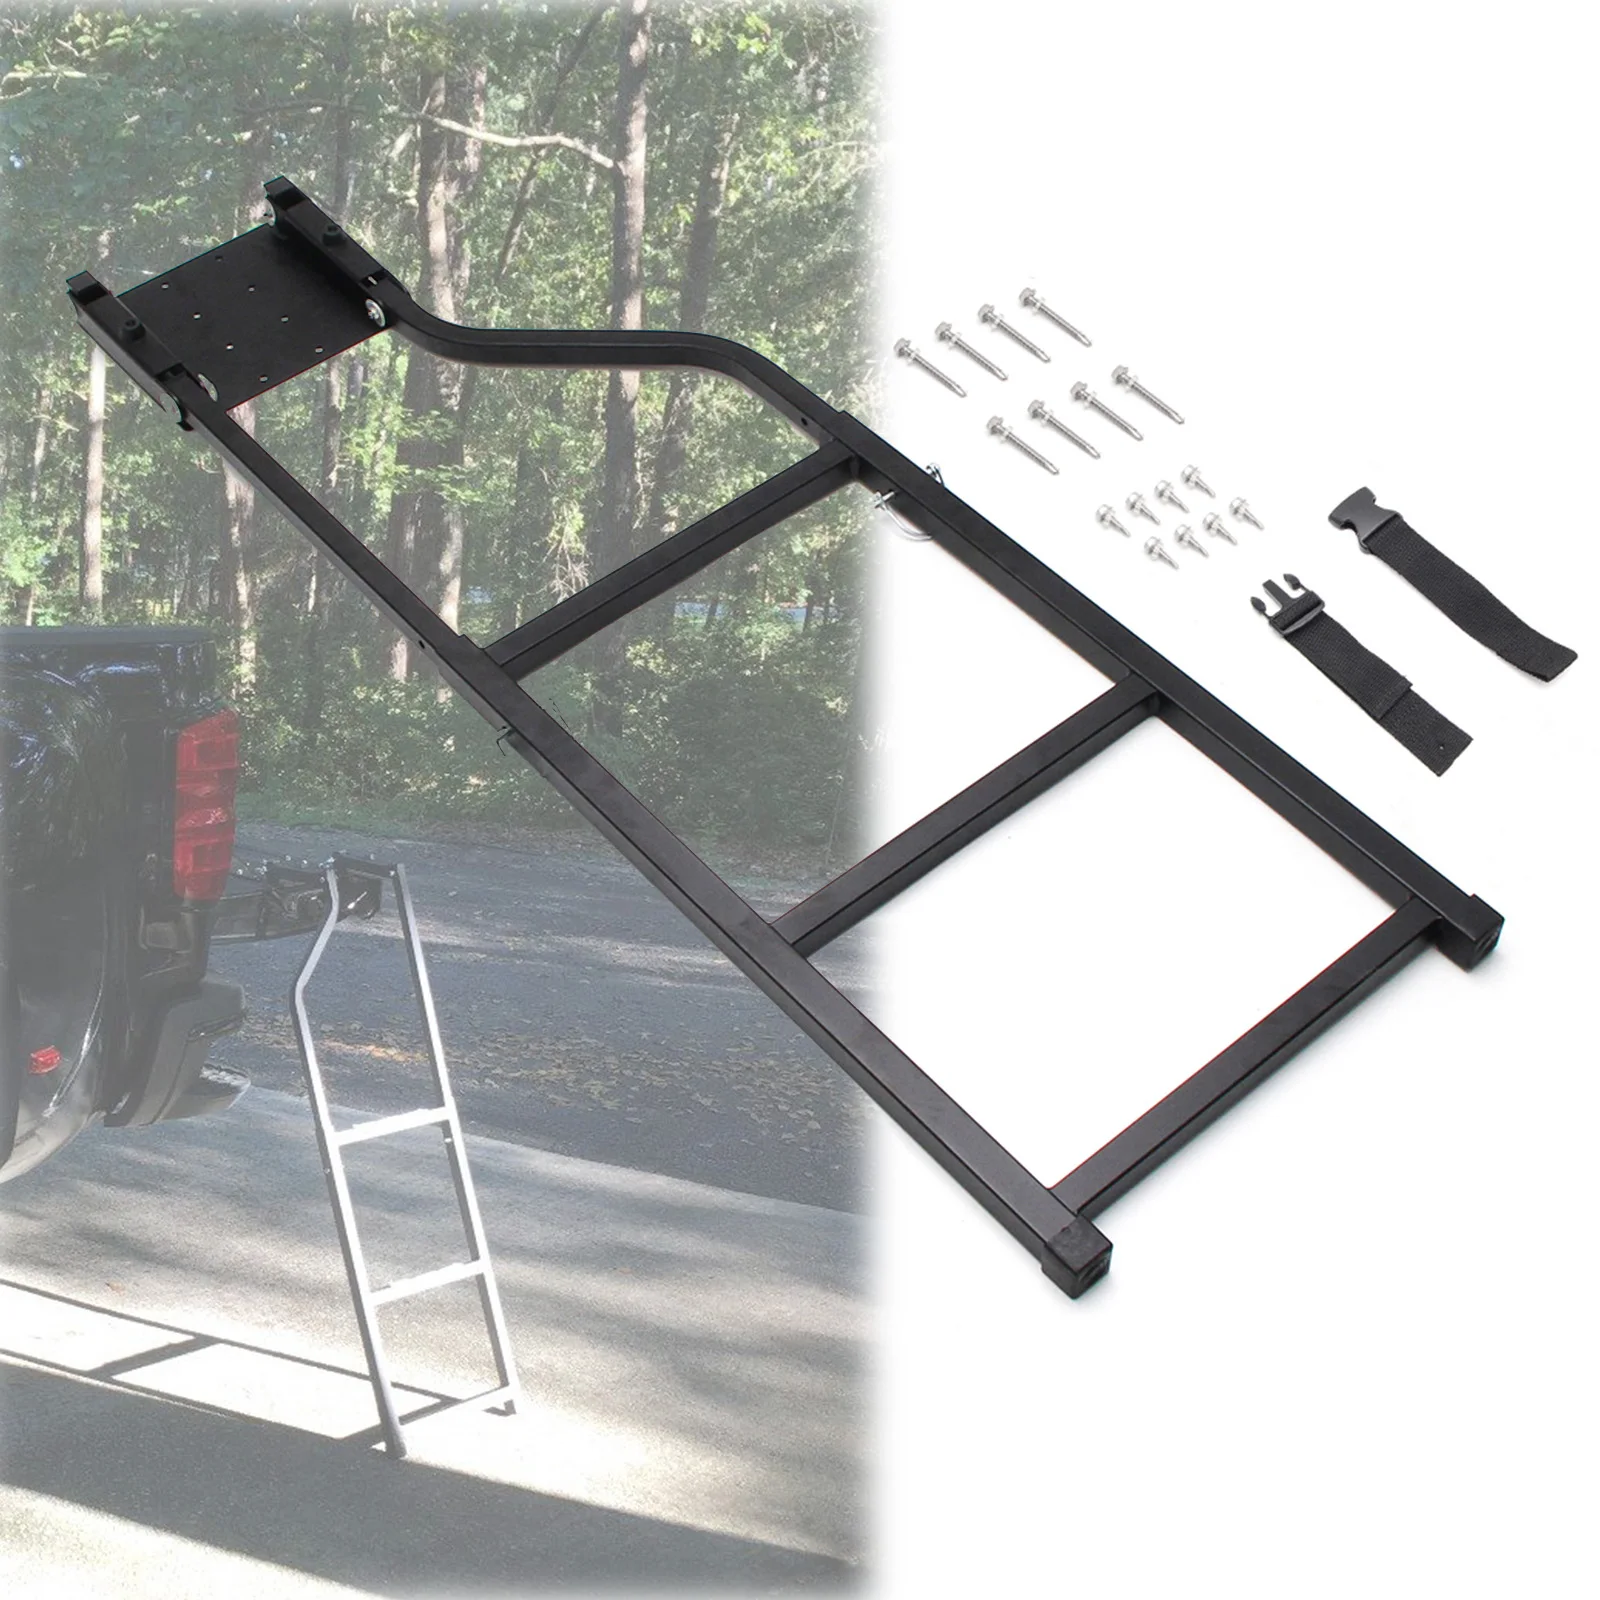 1 pcs Pickup Tailgate Step Cargo Accessories Truck Bed Ladder Universal Extension Step Ladder with Stainless Steel Self Drilling 1pc boat stainless steel 3 prong bracket wire bracket mast step marine accessories boat yacht universal bracket accessories